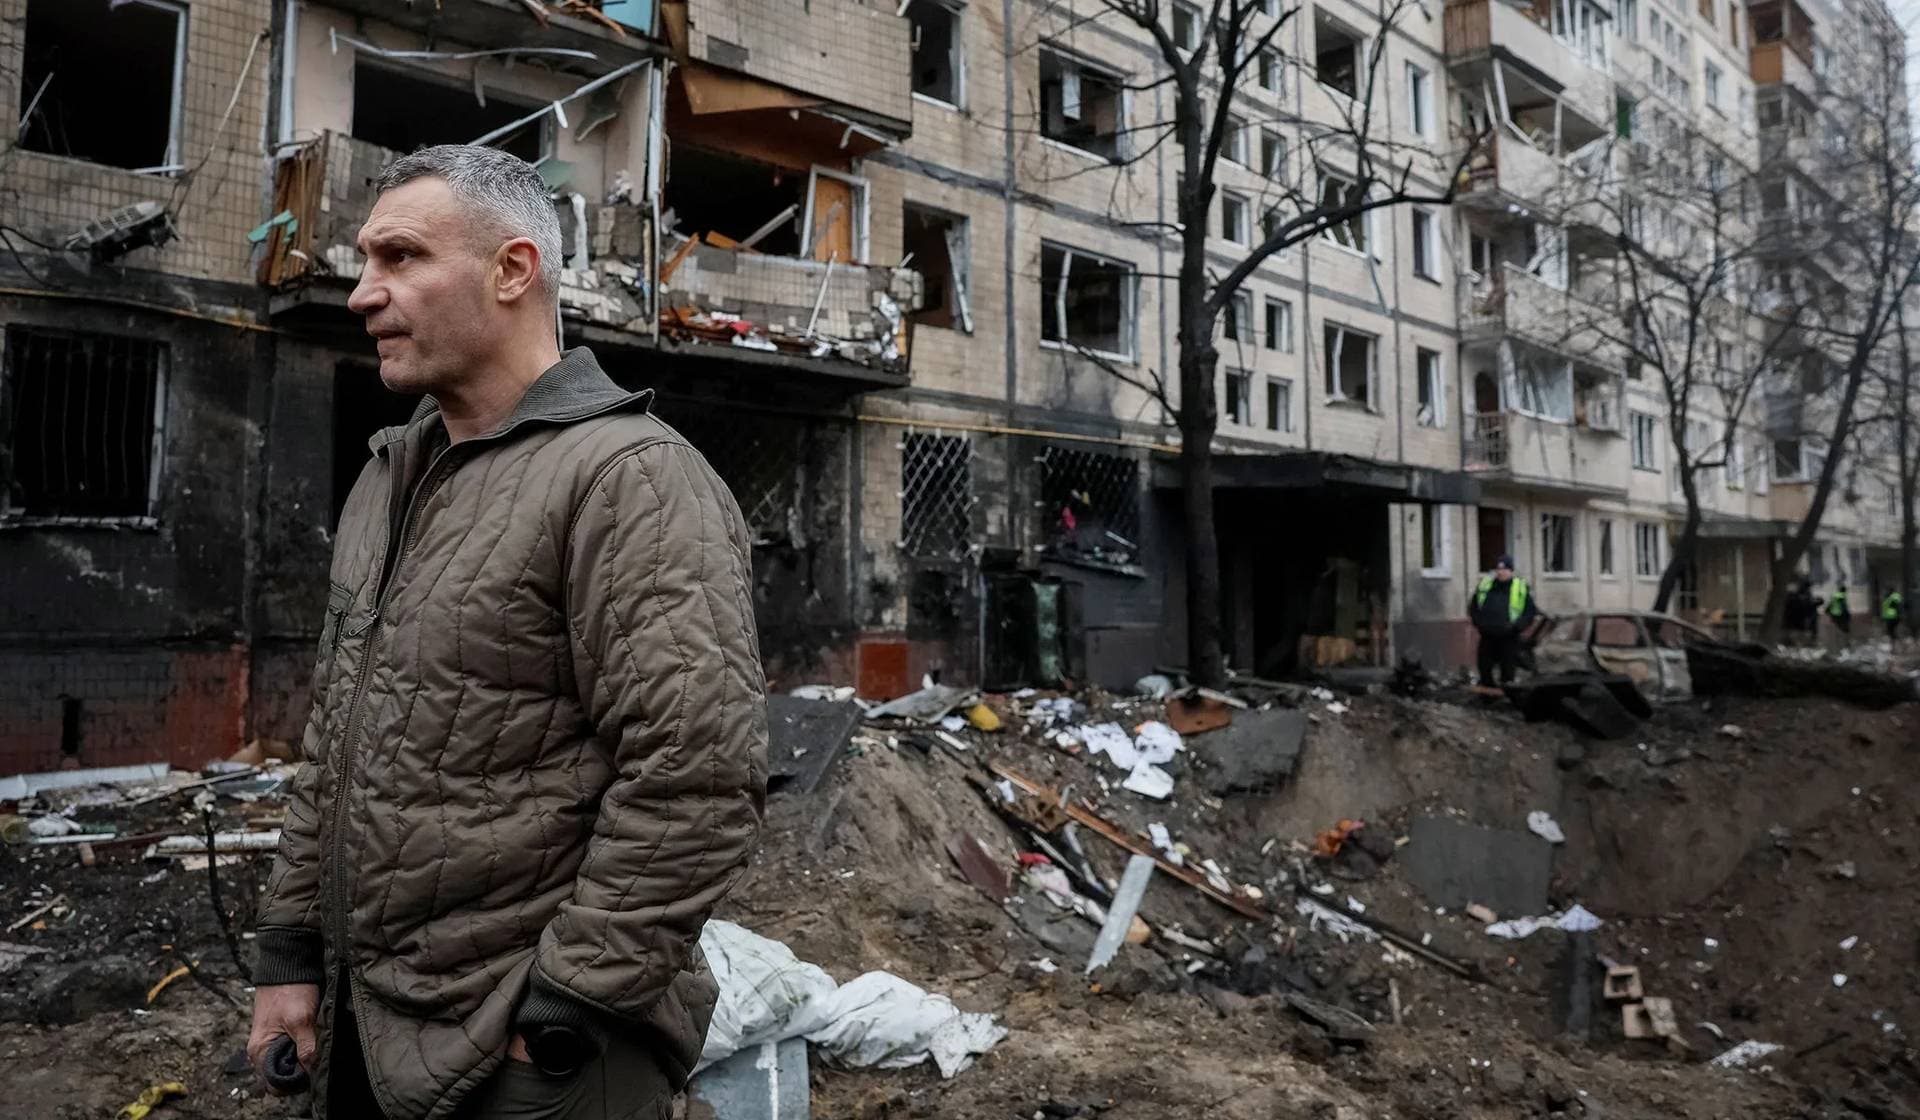 Kyiv Mayor Vitali Klitschko visits the site of an apartment building damaged during a Russian missile strike in Kyiv